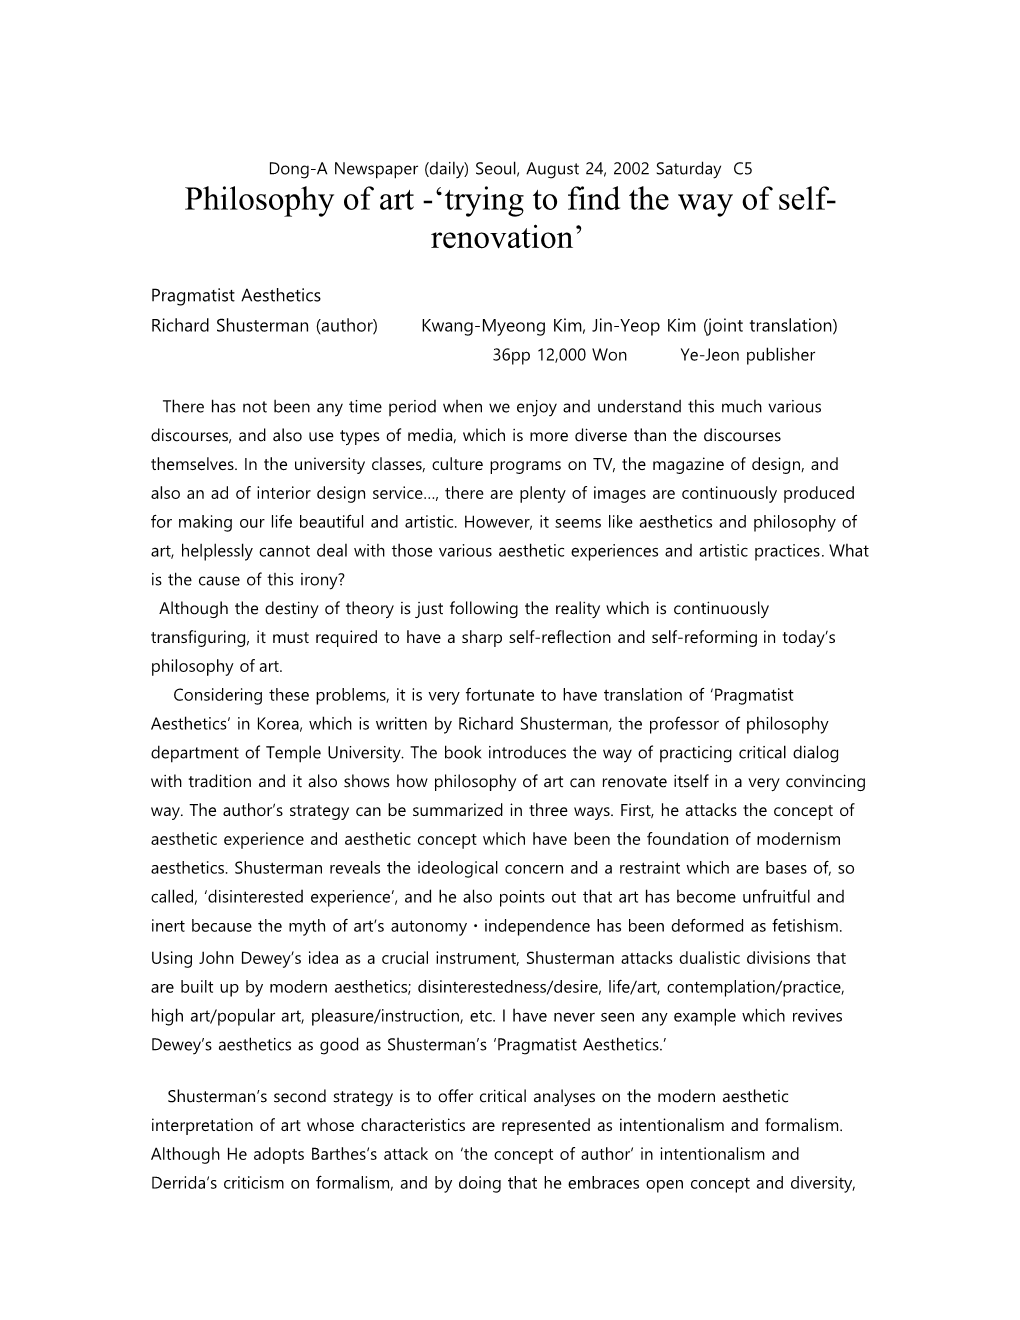 Philosophy of Art - Trying to Find the Way of Self-Renovation